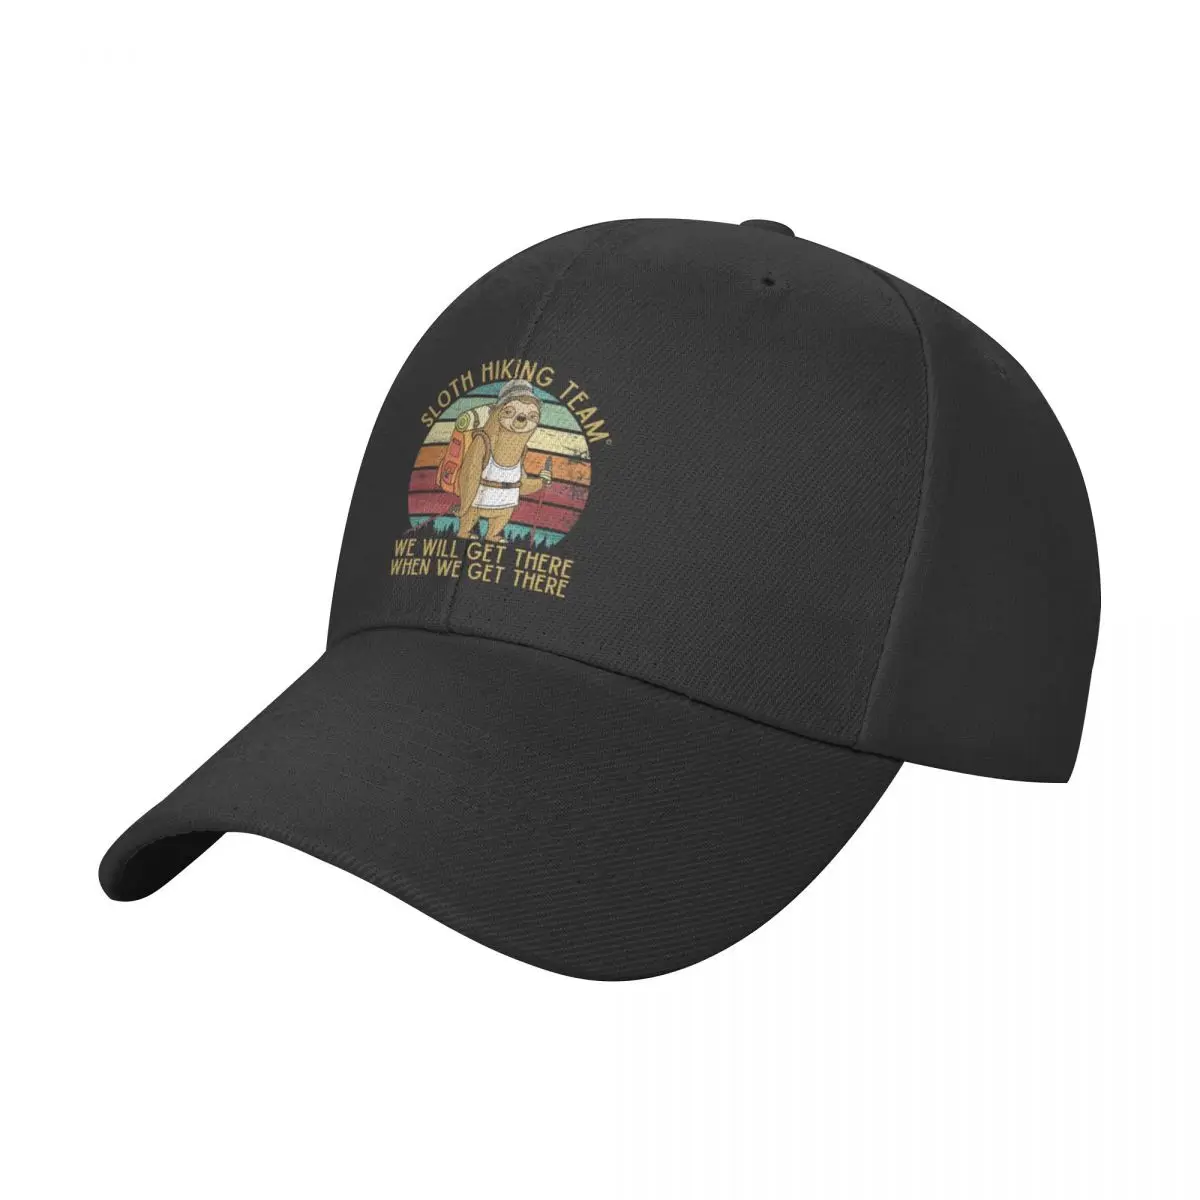 

Sloth Hiking Team - We will get there, when we get there, Funny Vintage Baseball Cap Hat Man Luxury Brand Man cap Men's Women's